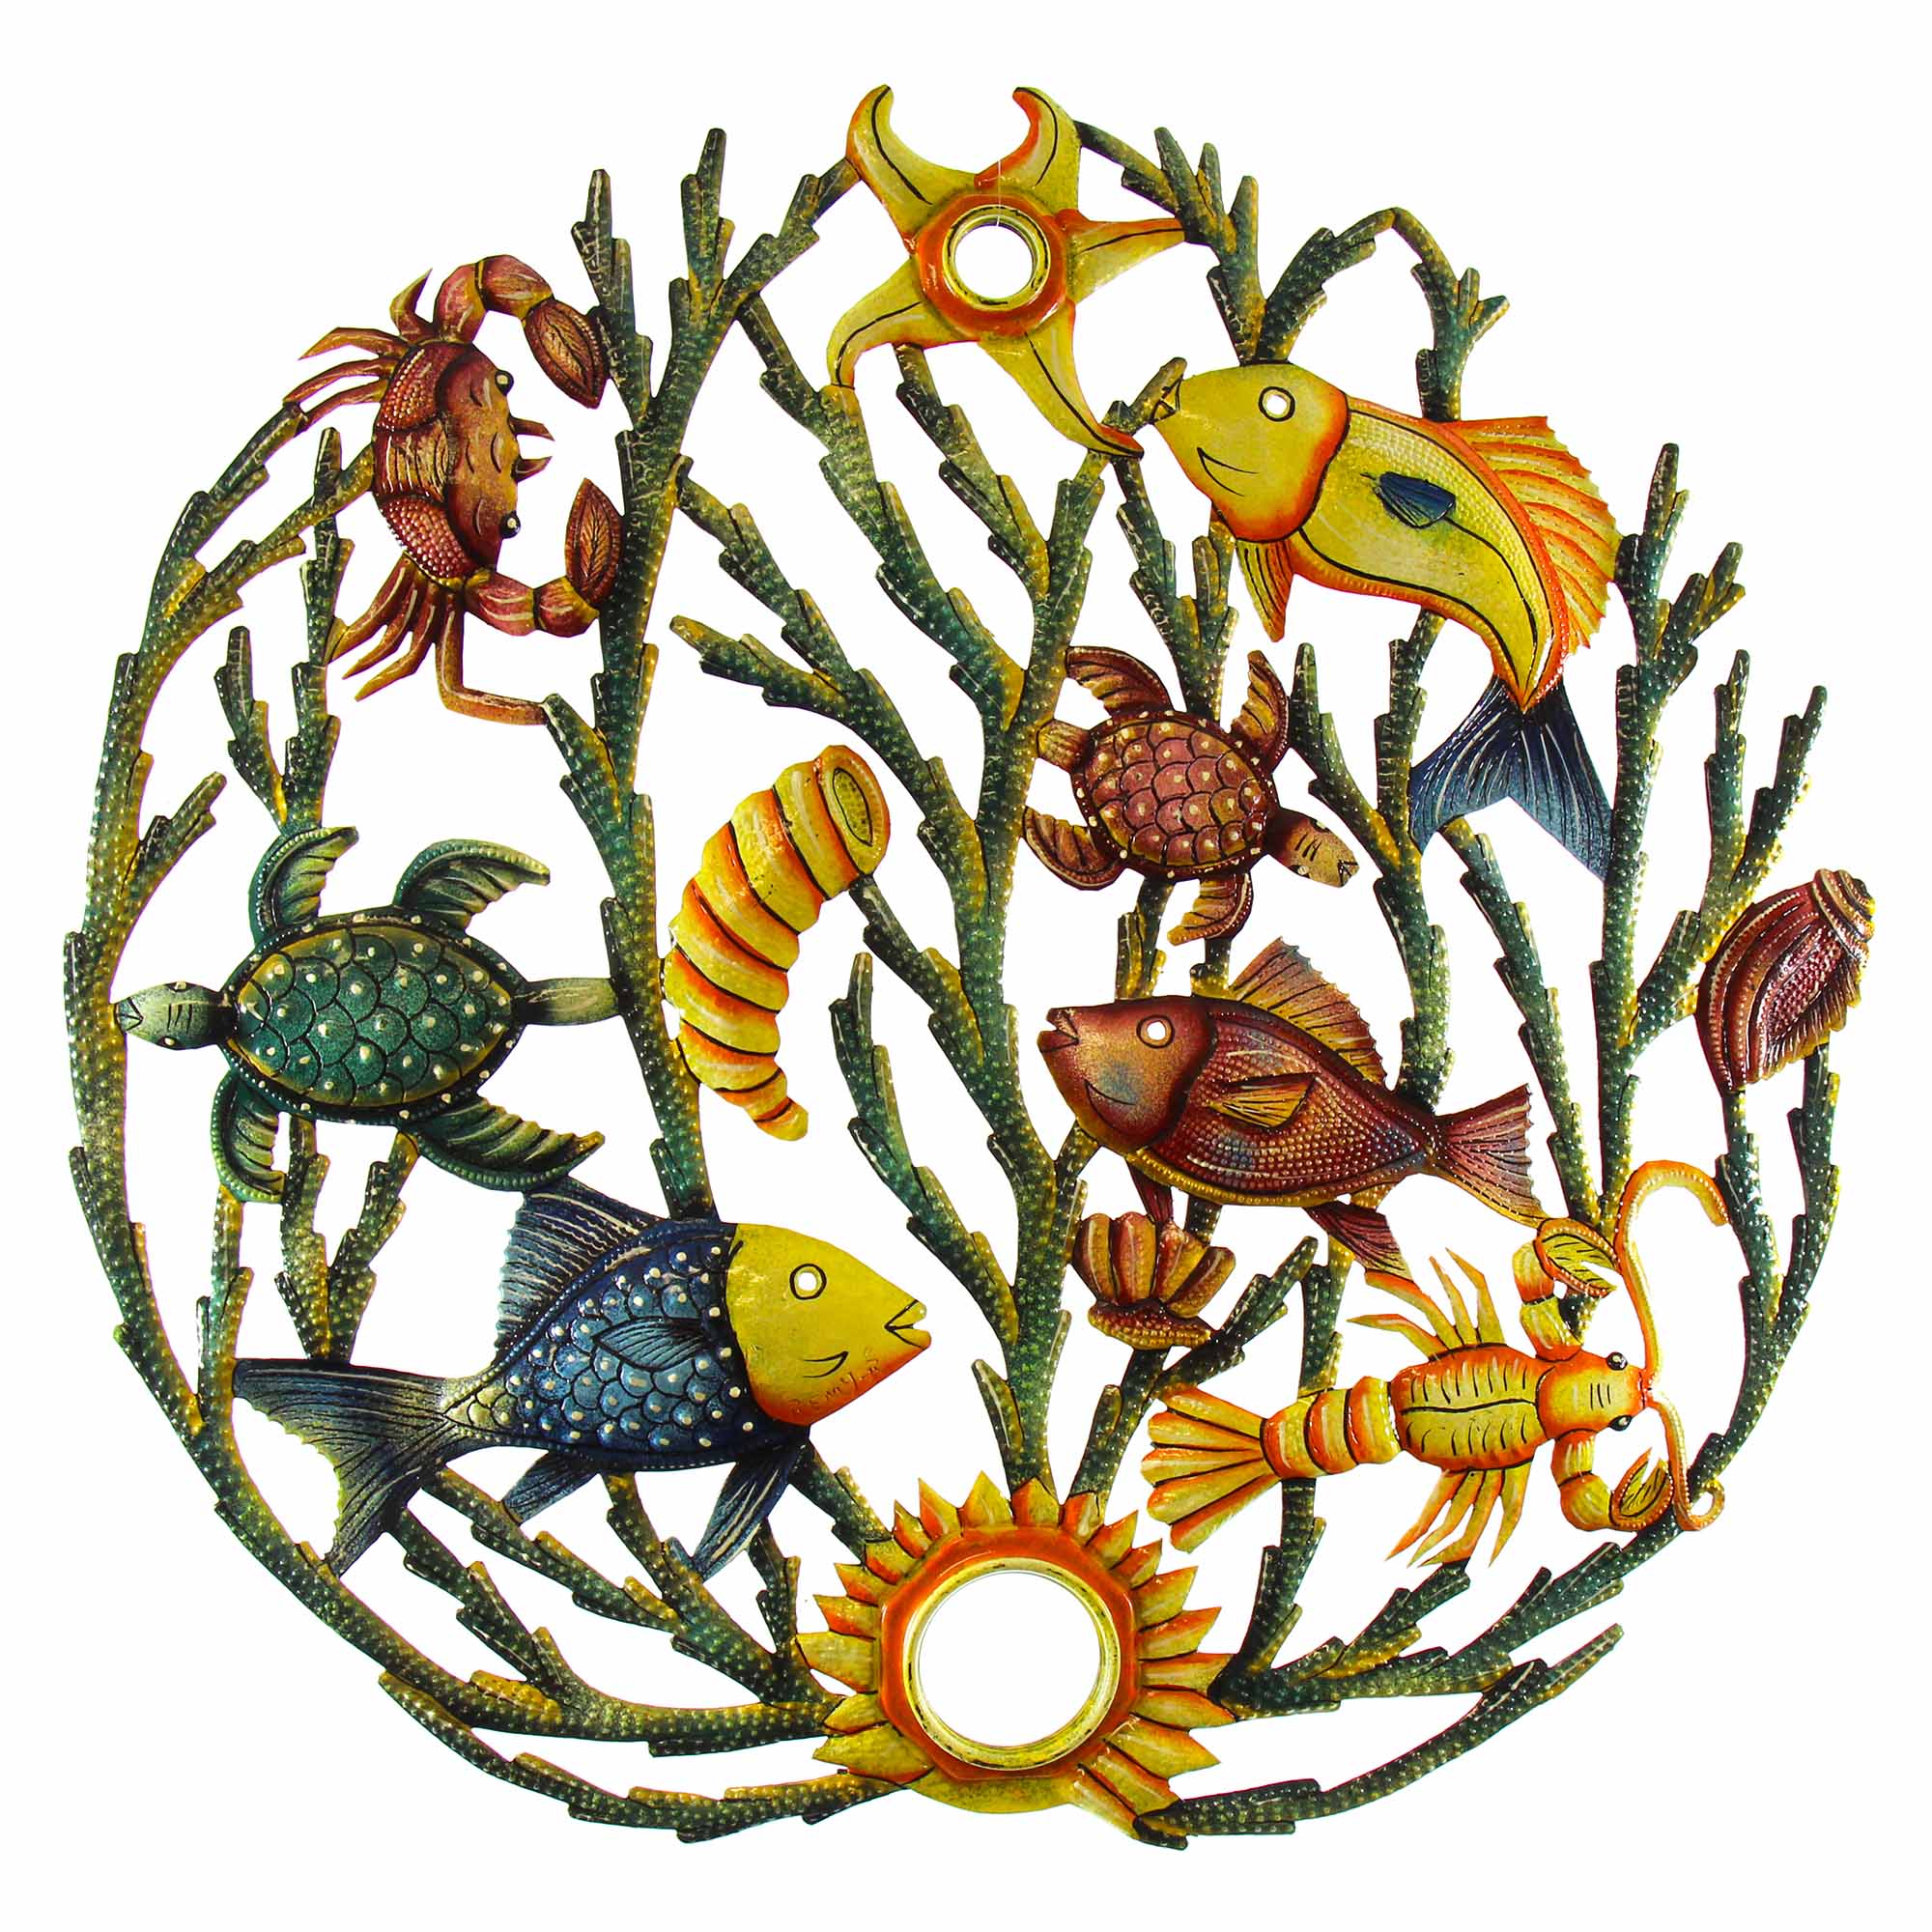 Global Crafts 24" Recycled Hand-Painted Haitian Metal Wall Art Tree of Life, Autumn Spiral - 3